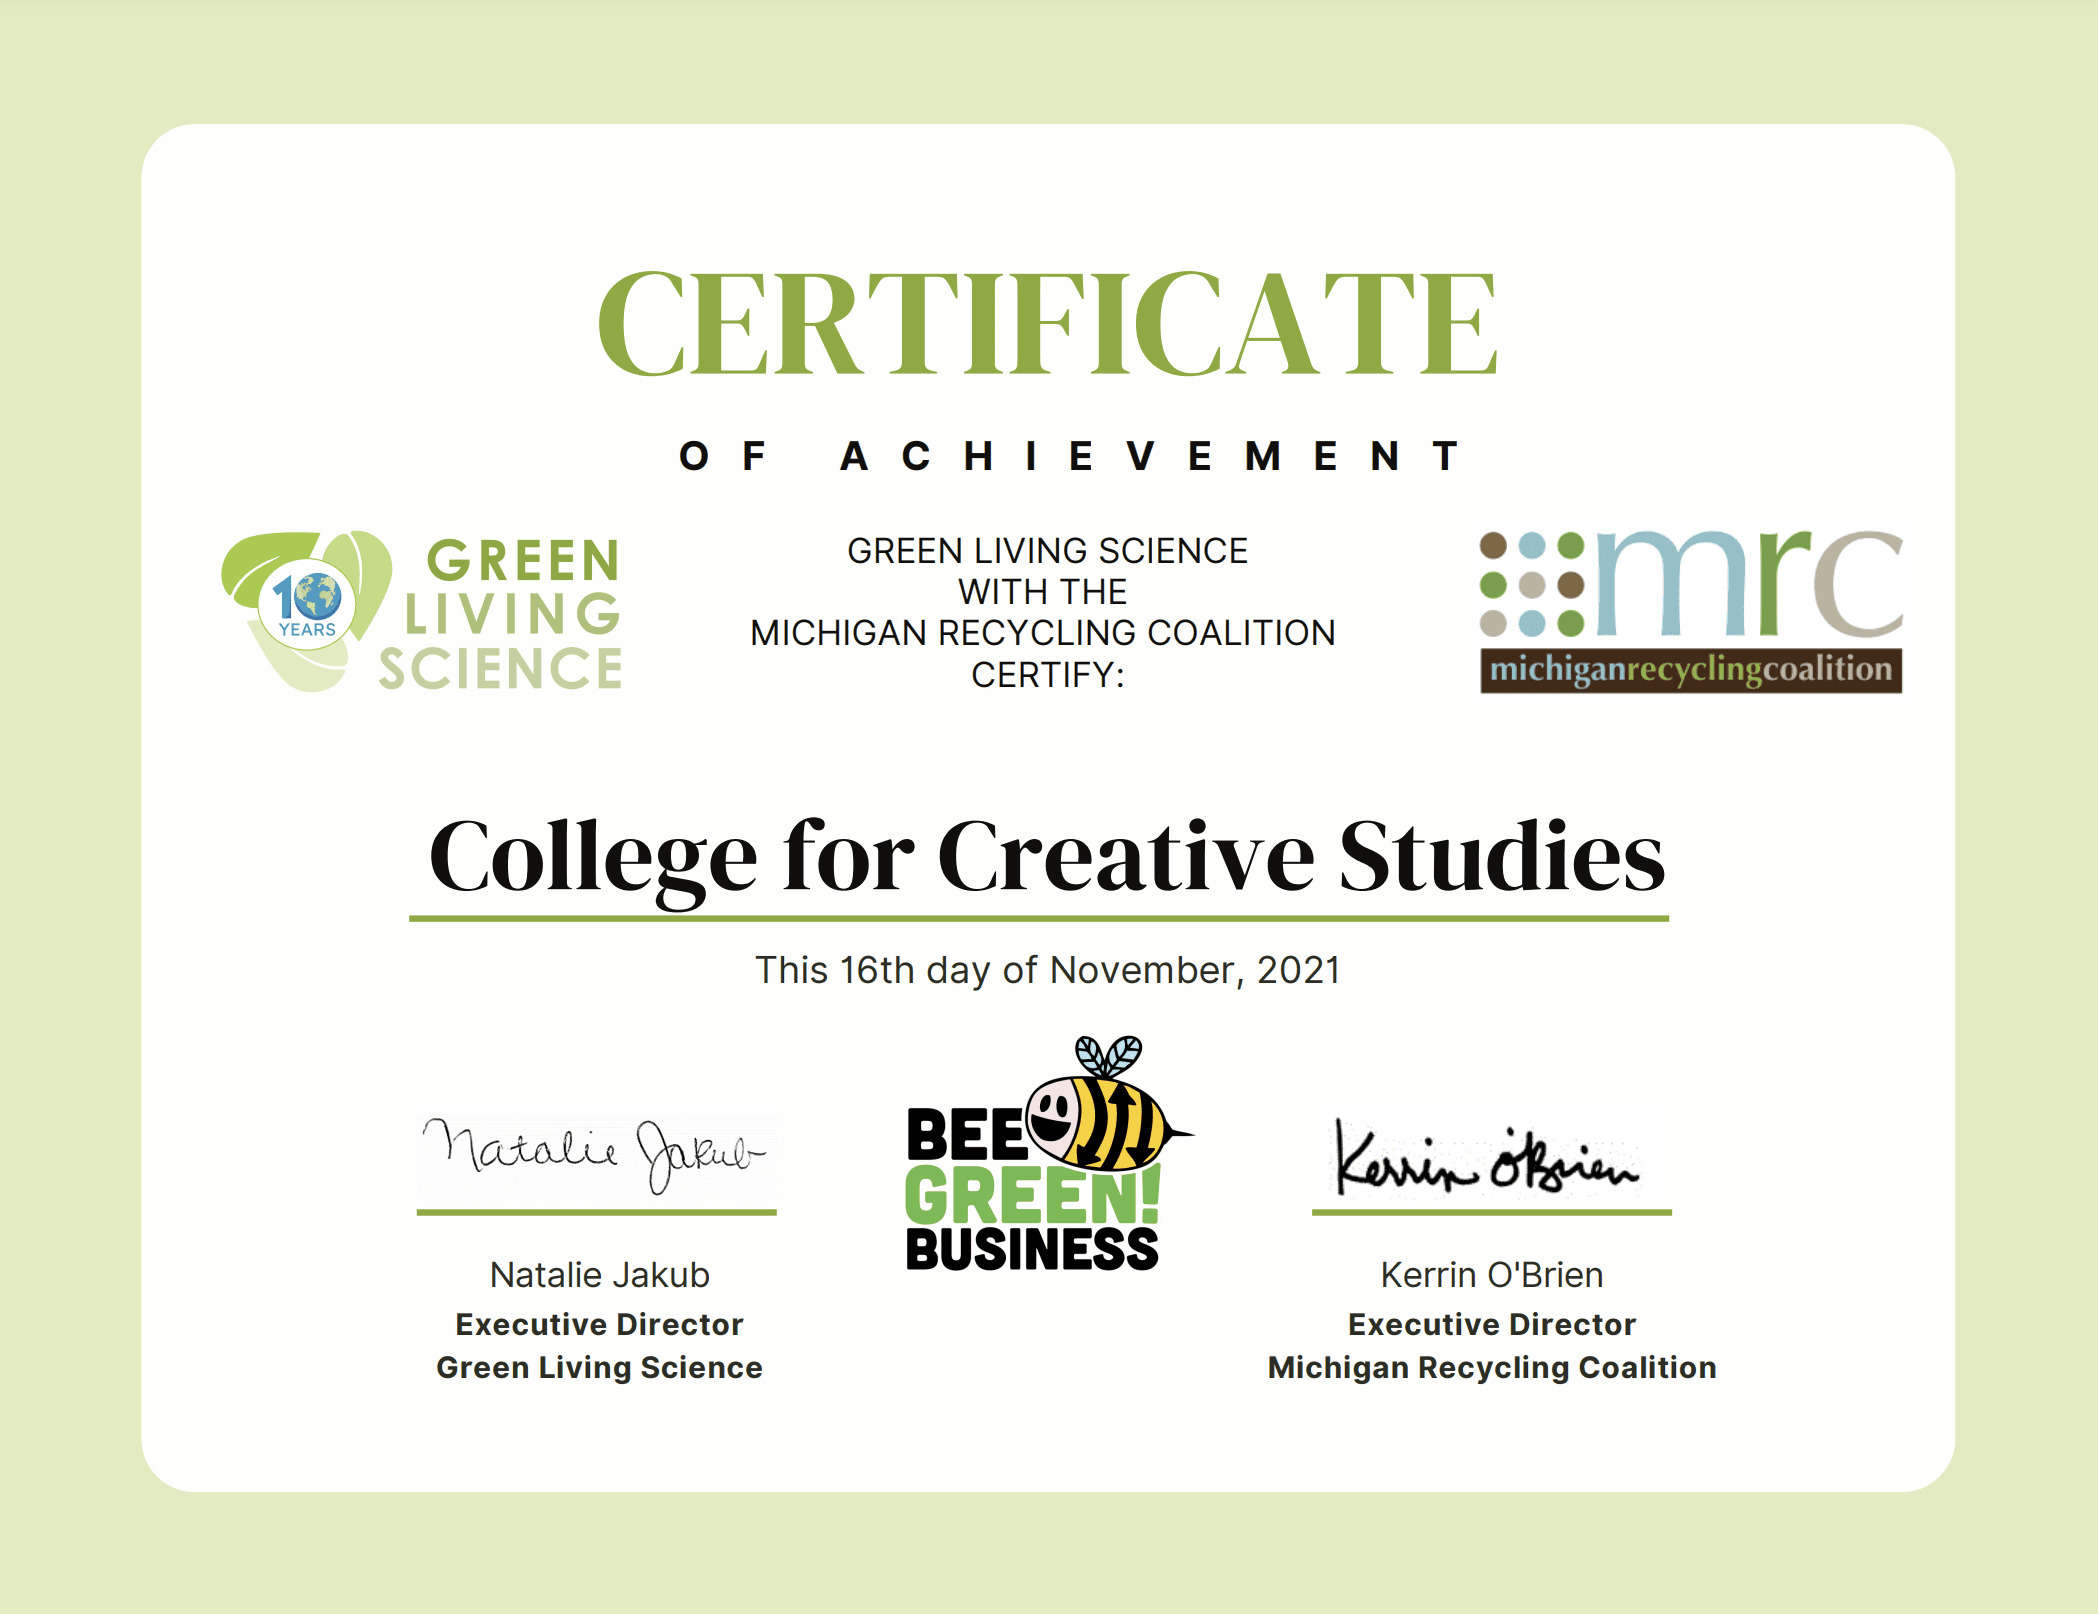 A certificate of achievement for the college for creative studies sustainability efforts from the michigan recycling coalition and Living Green science organizations